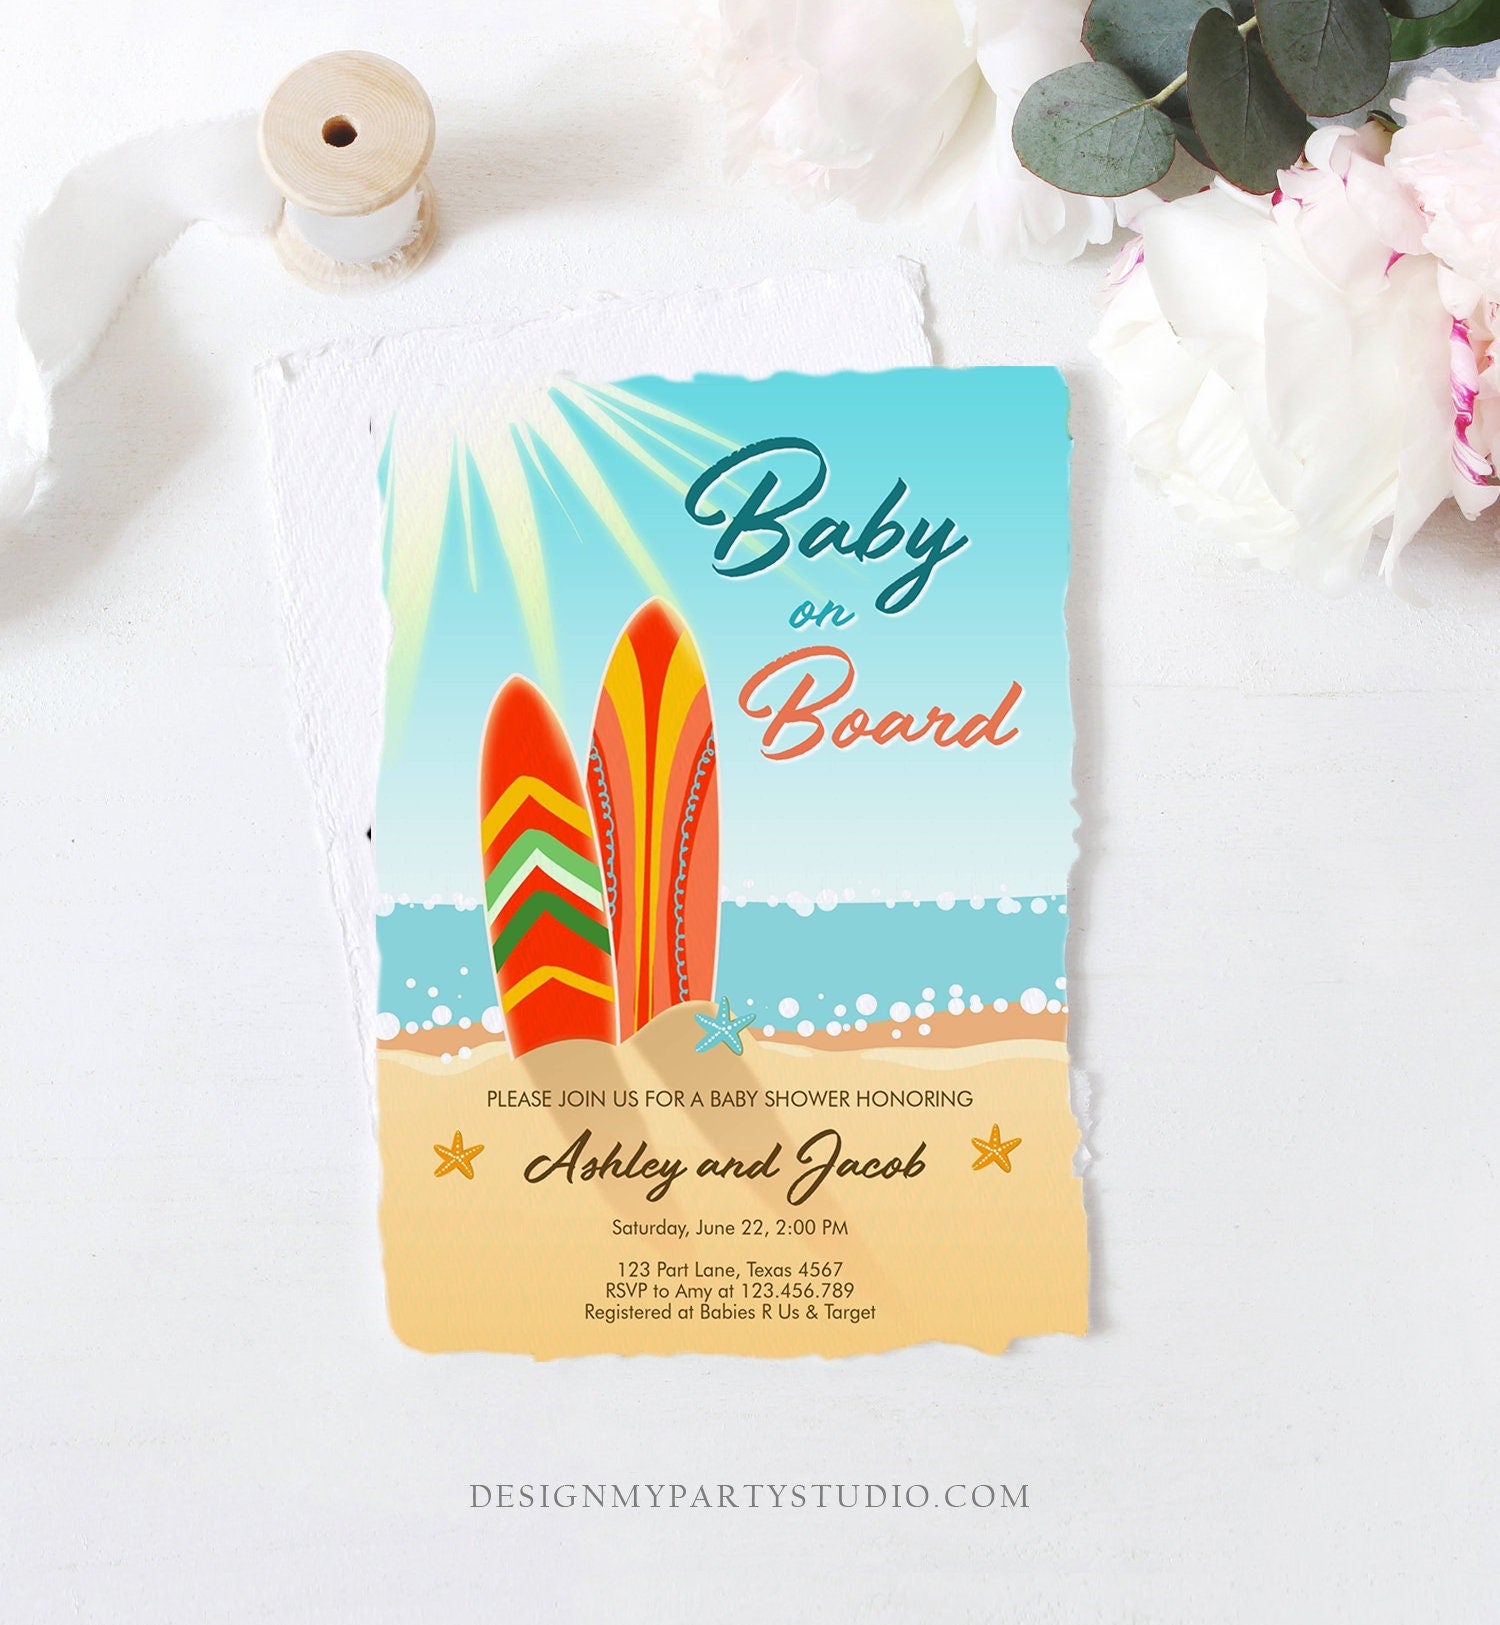 Baby on Board Baby Shower  Baby girl shower themes, Surfer baby